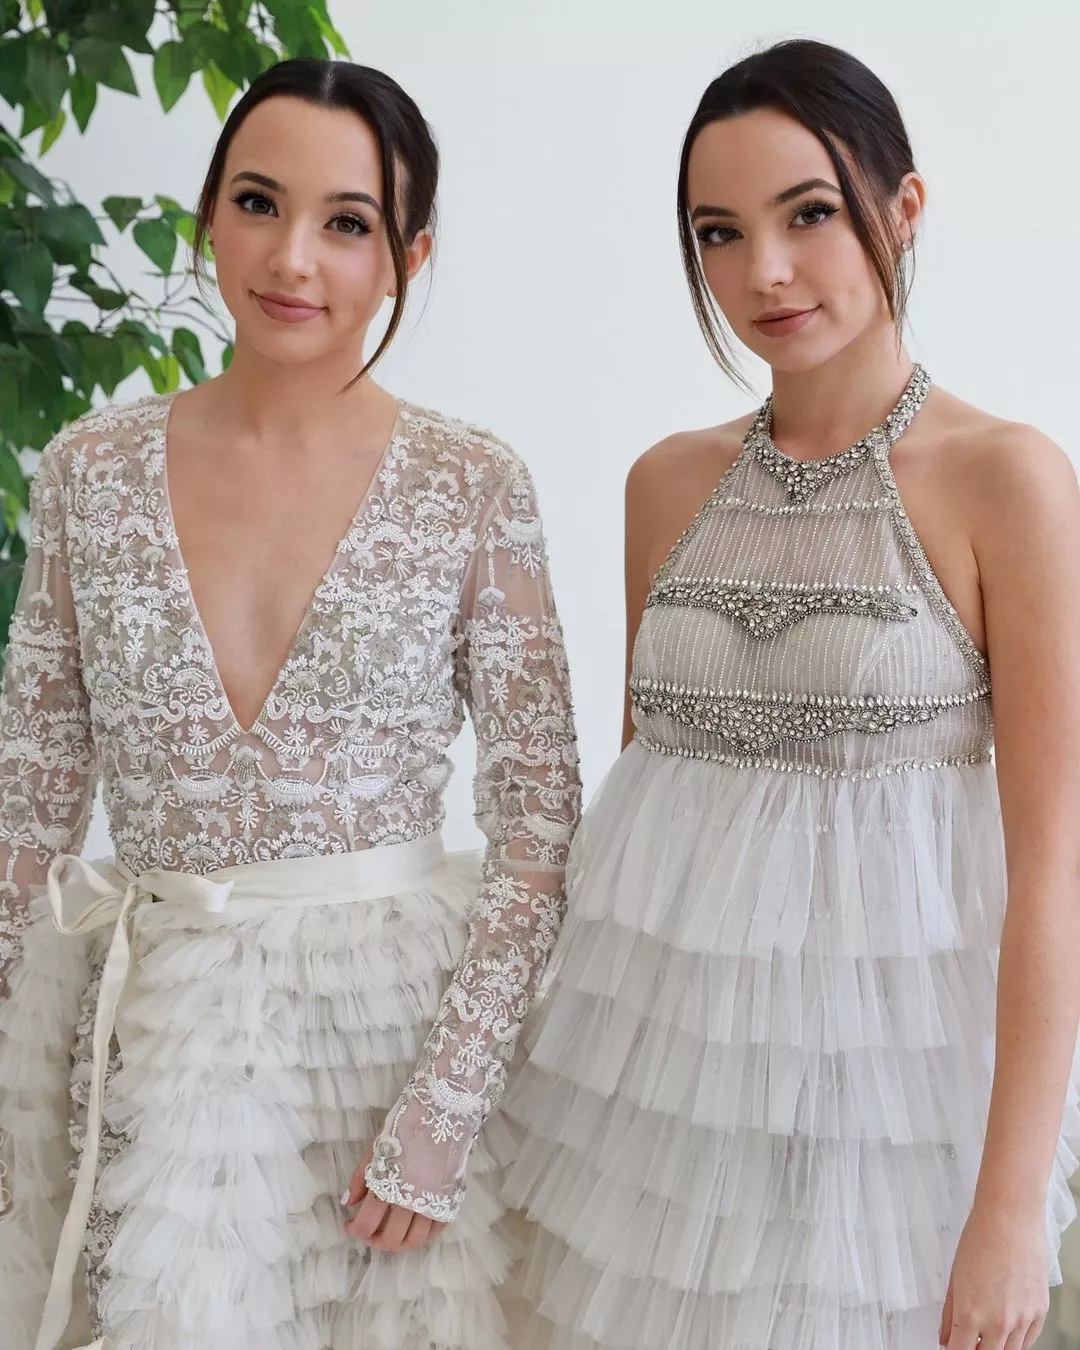 Merrell Twins Naked